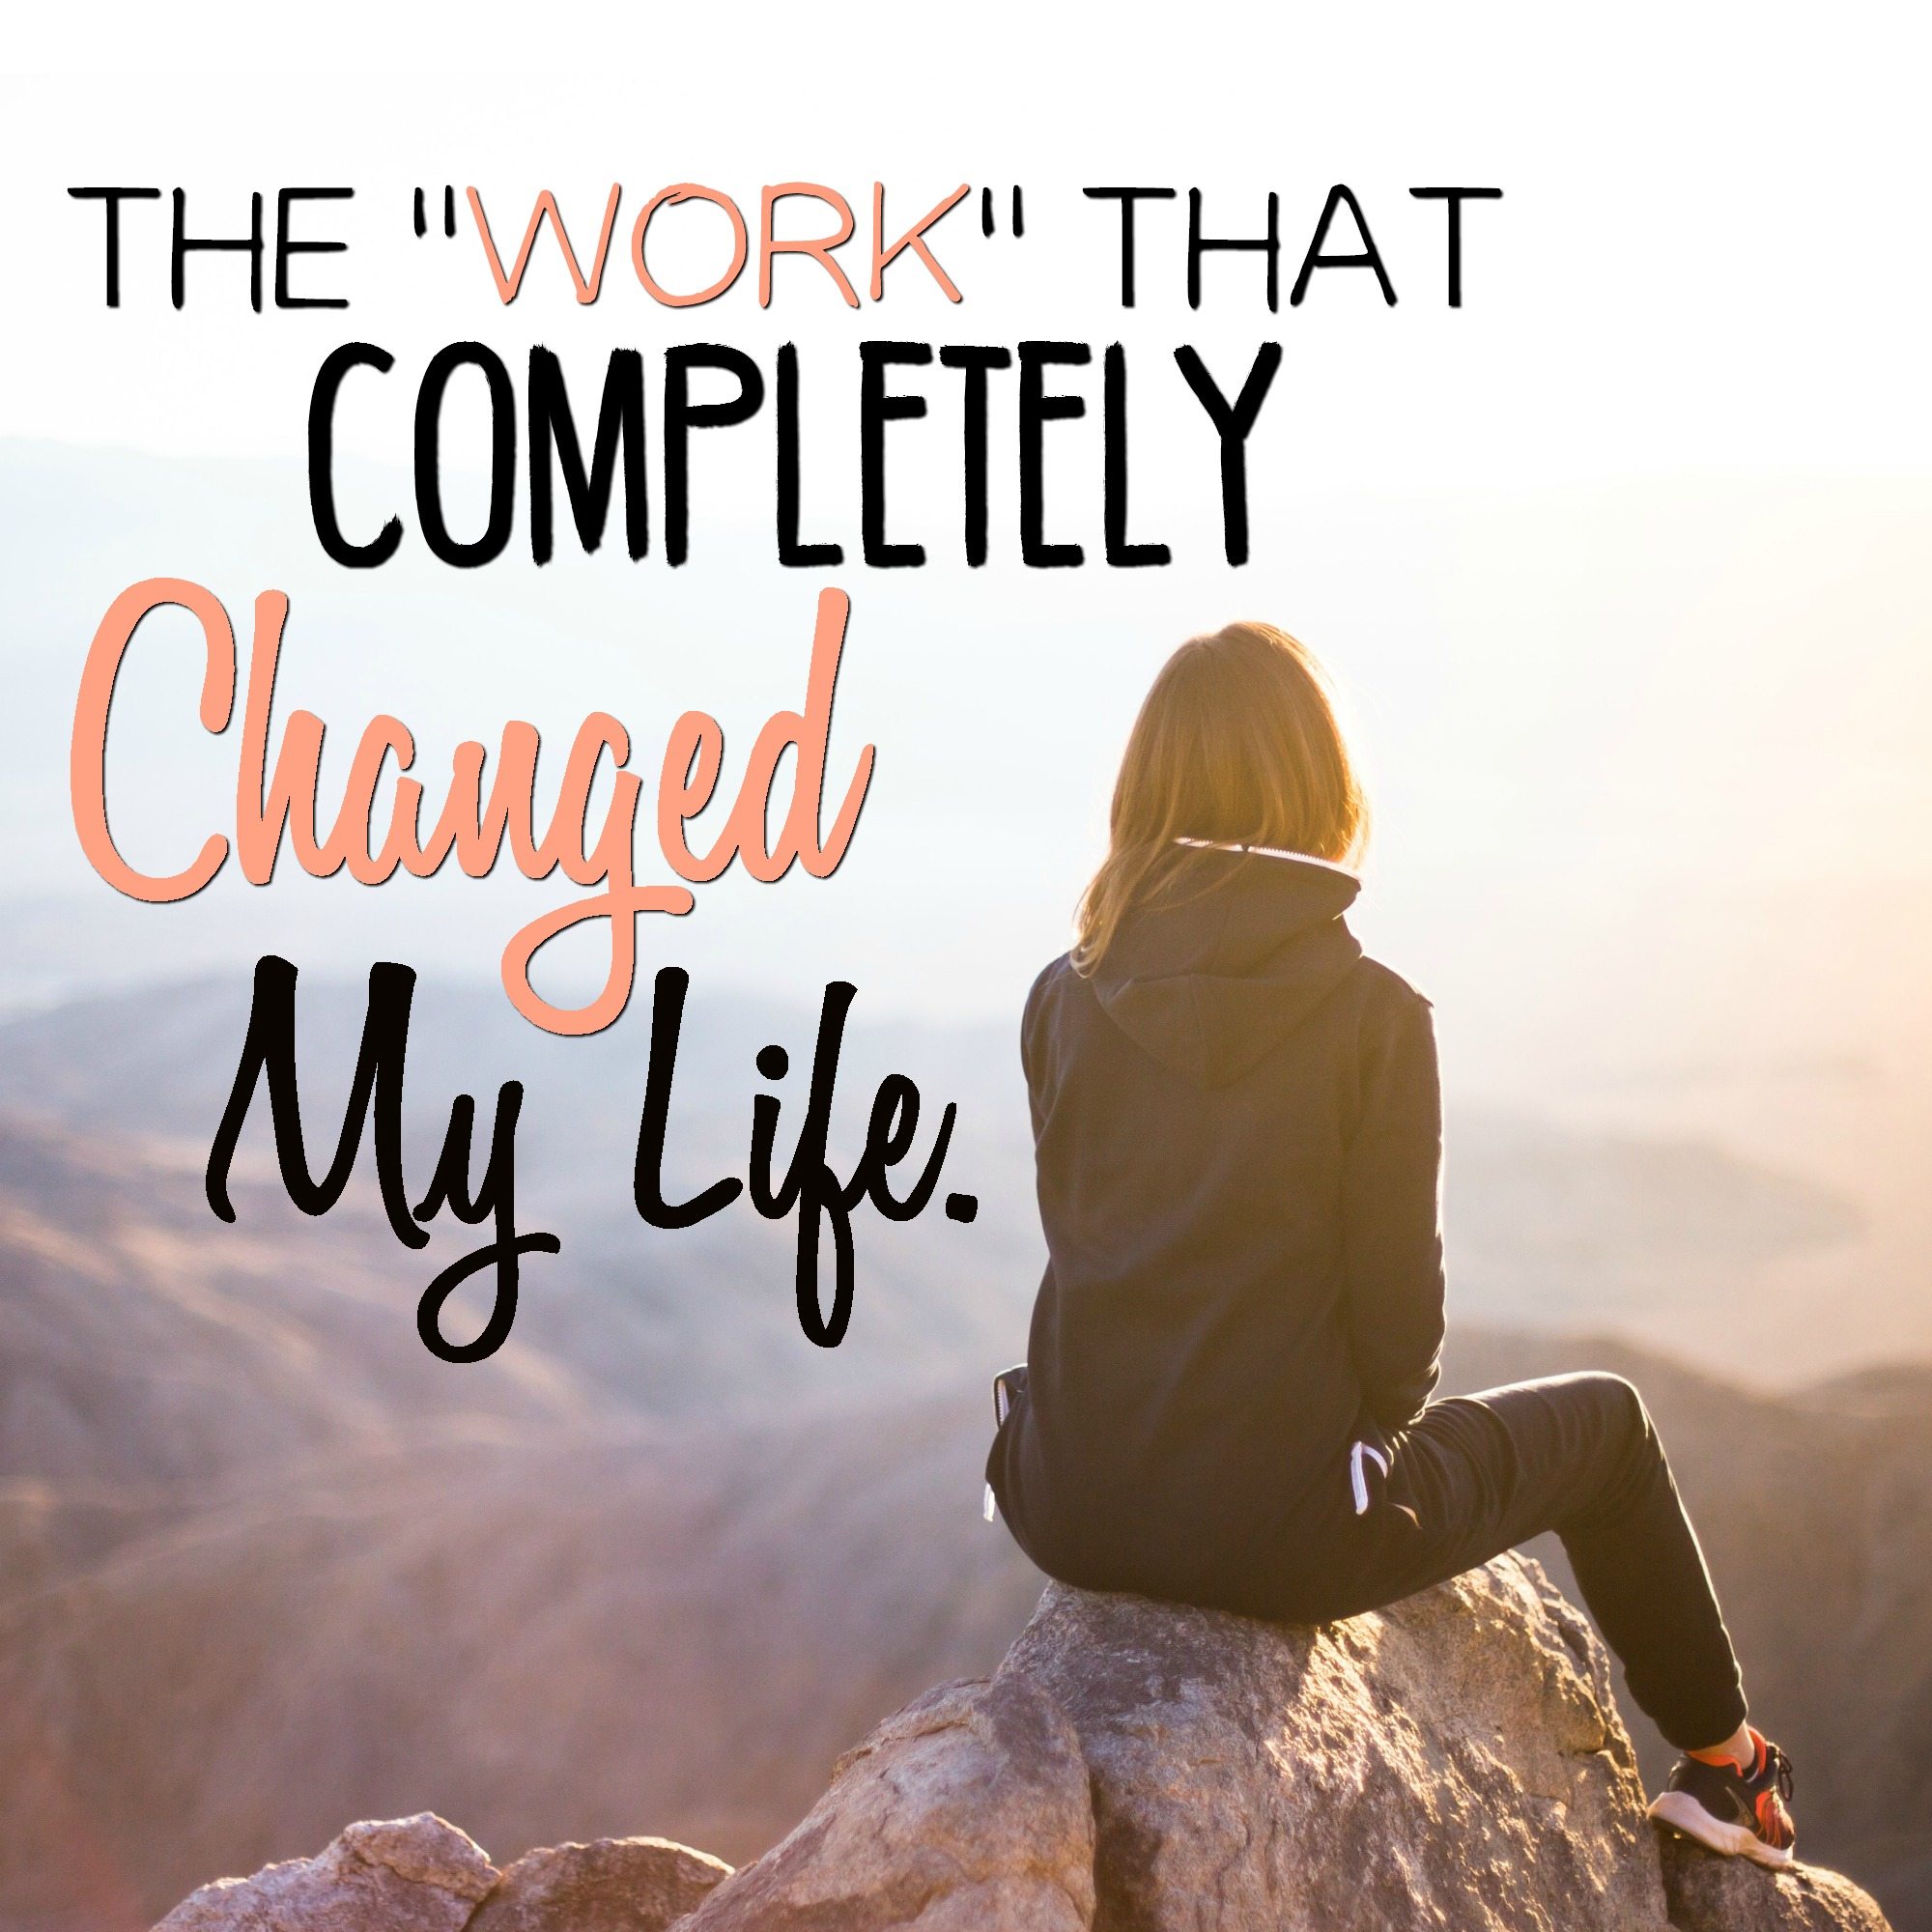 The “Work” that Completely Changed My Life